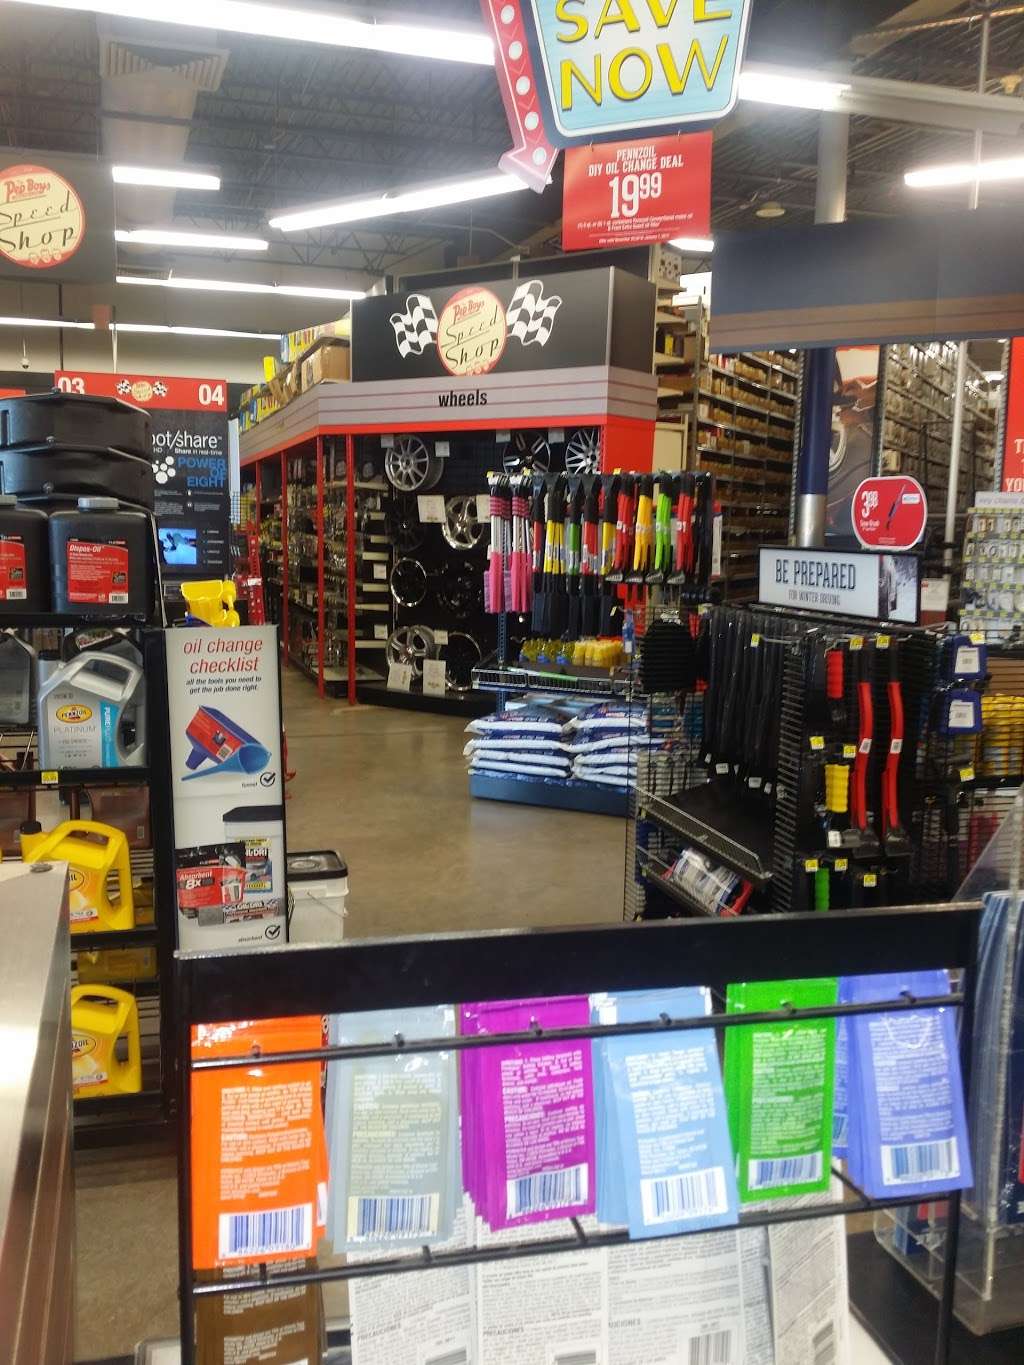 Pep Boys Auto Parts & Service | 9909 Pulaski Hwy, Middle River, MD 21220 | Phone: (410) 686-3610